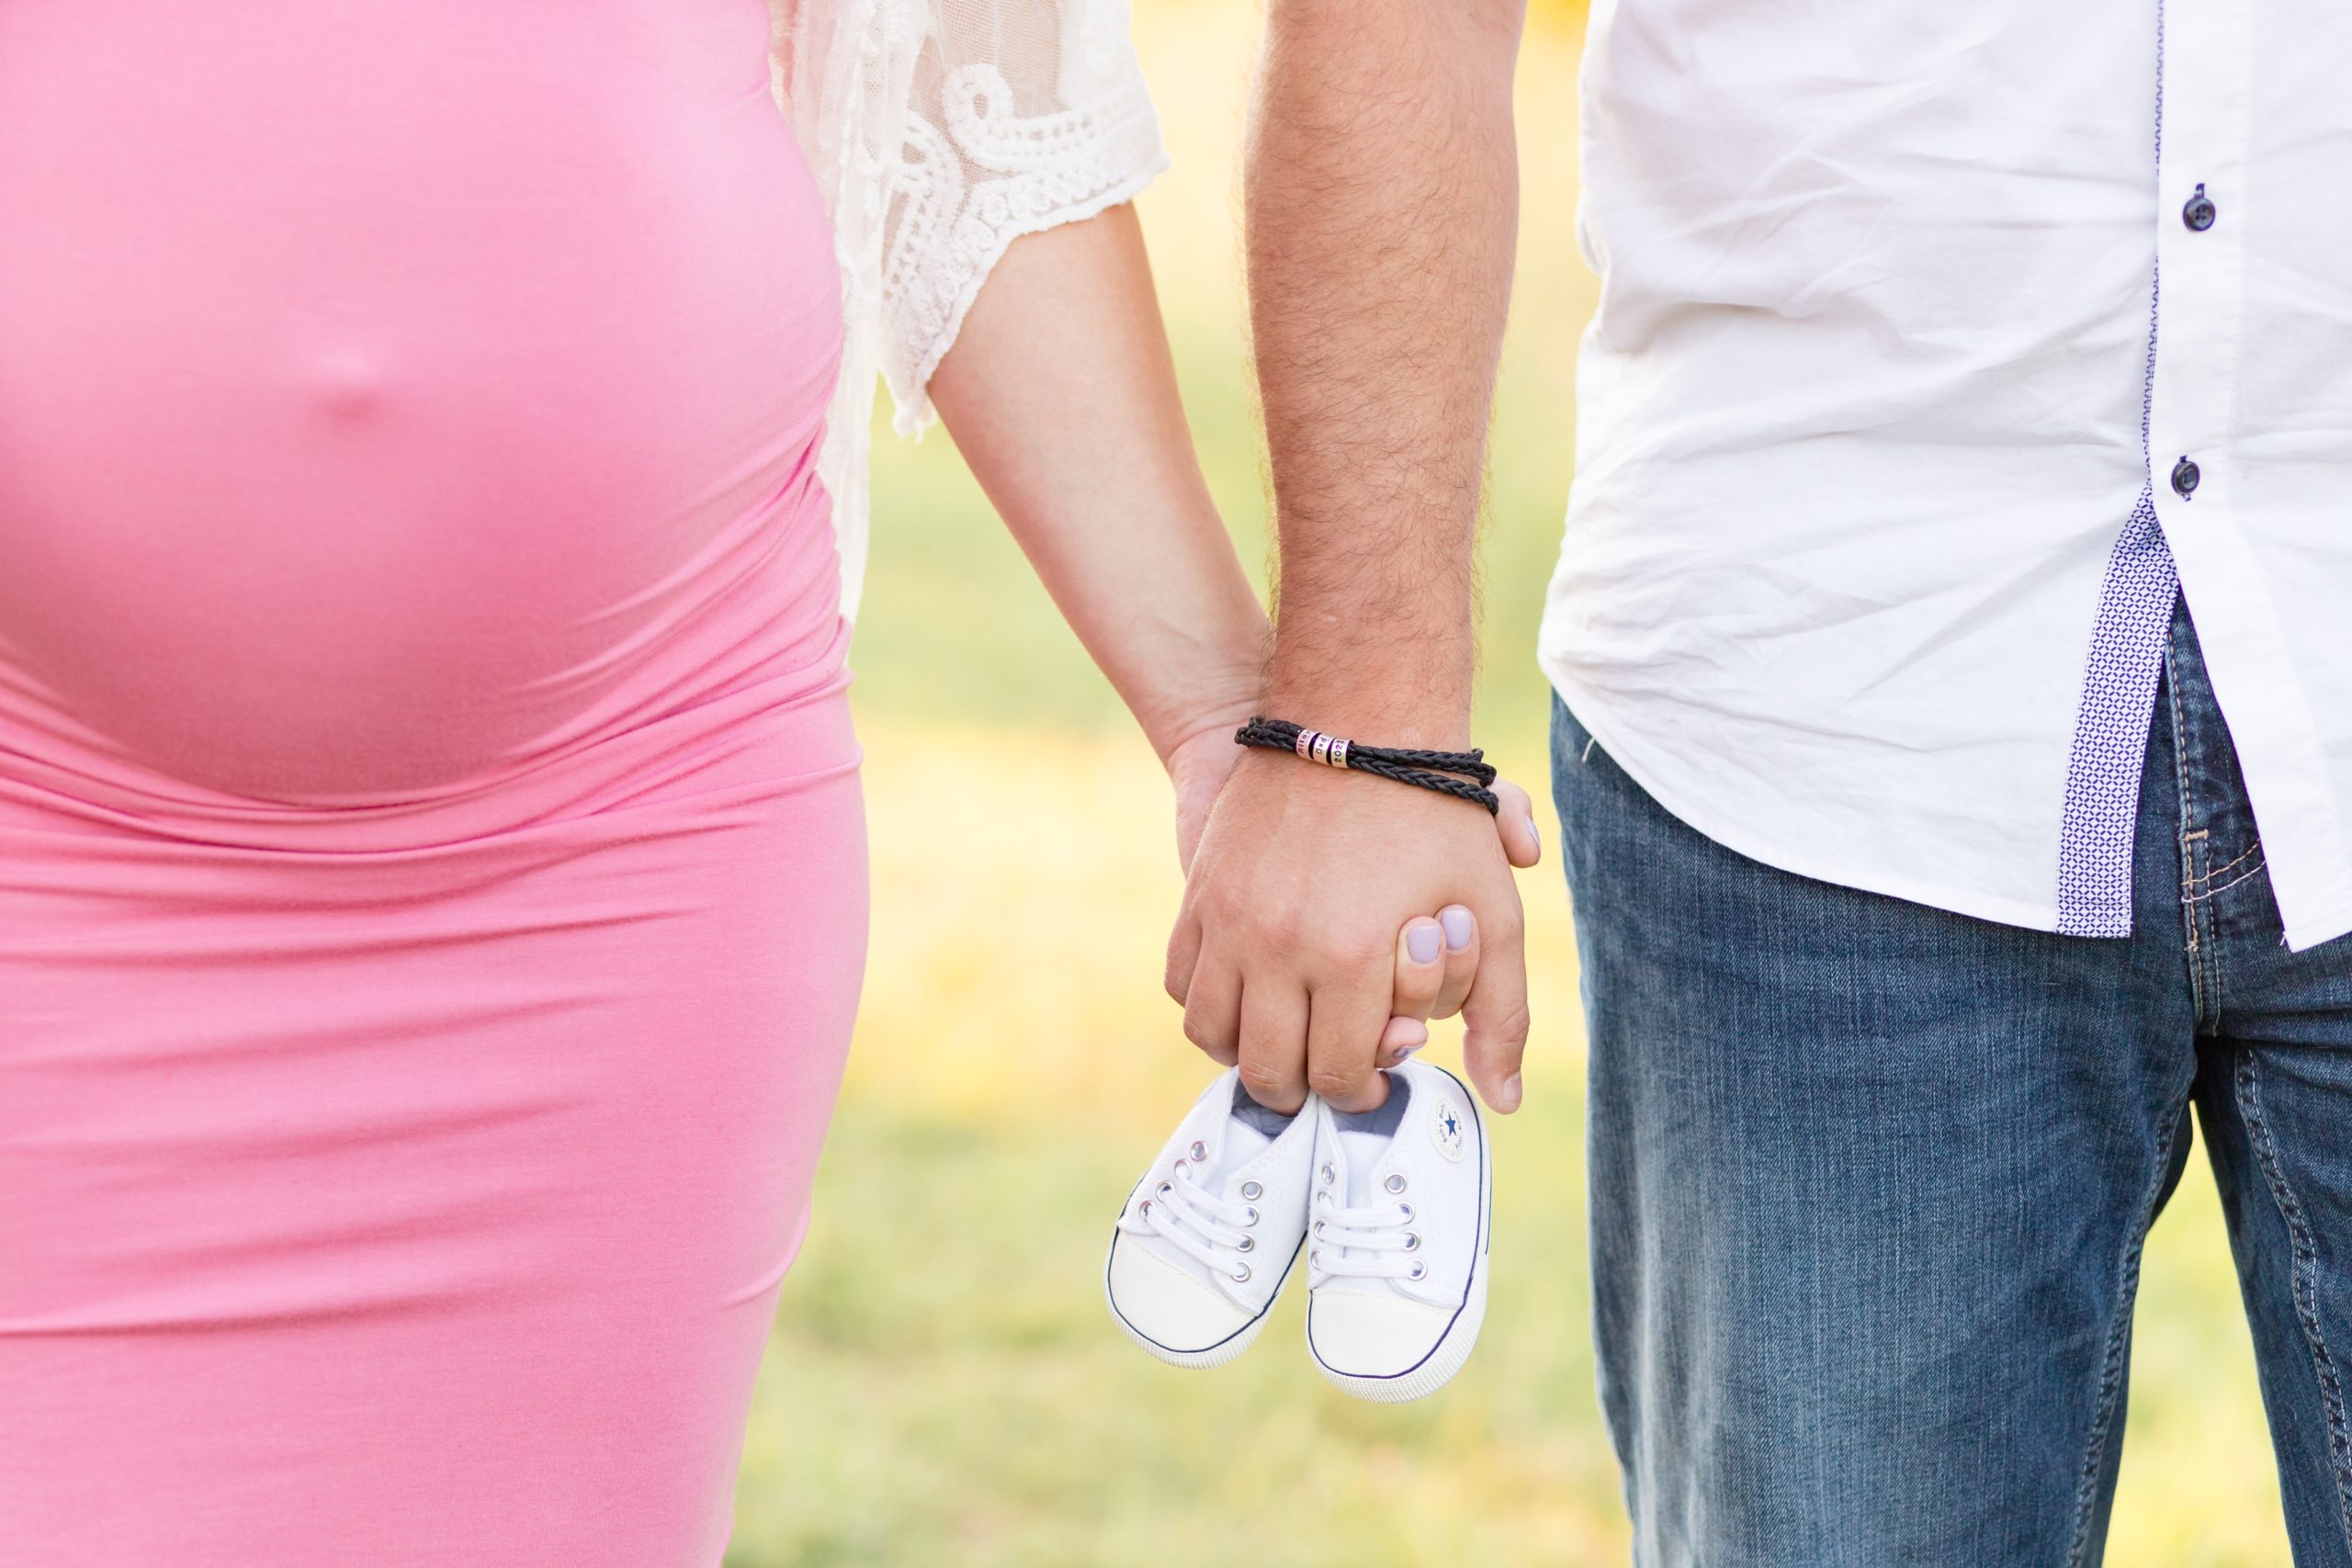 Preparing for your maternity session can be tough! What do you wear? What does your spouse wear? Do you bring props? We're here to answer those questions for you! Click to read more tips for preparing for your mini session!